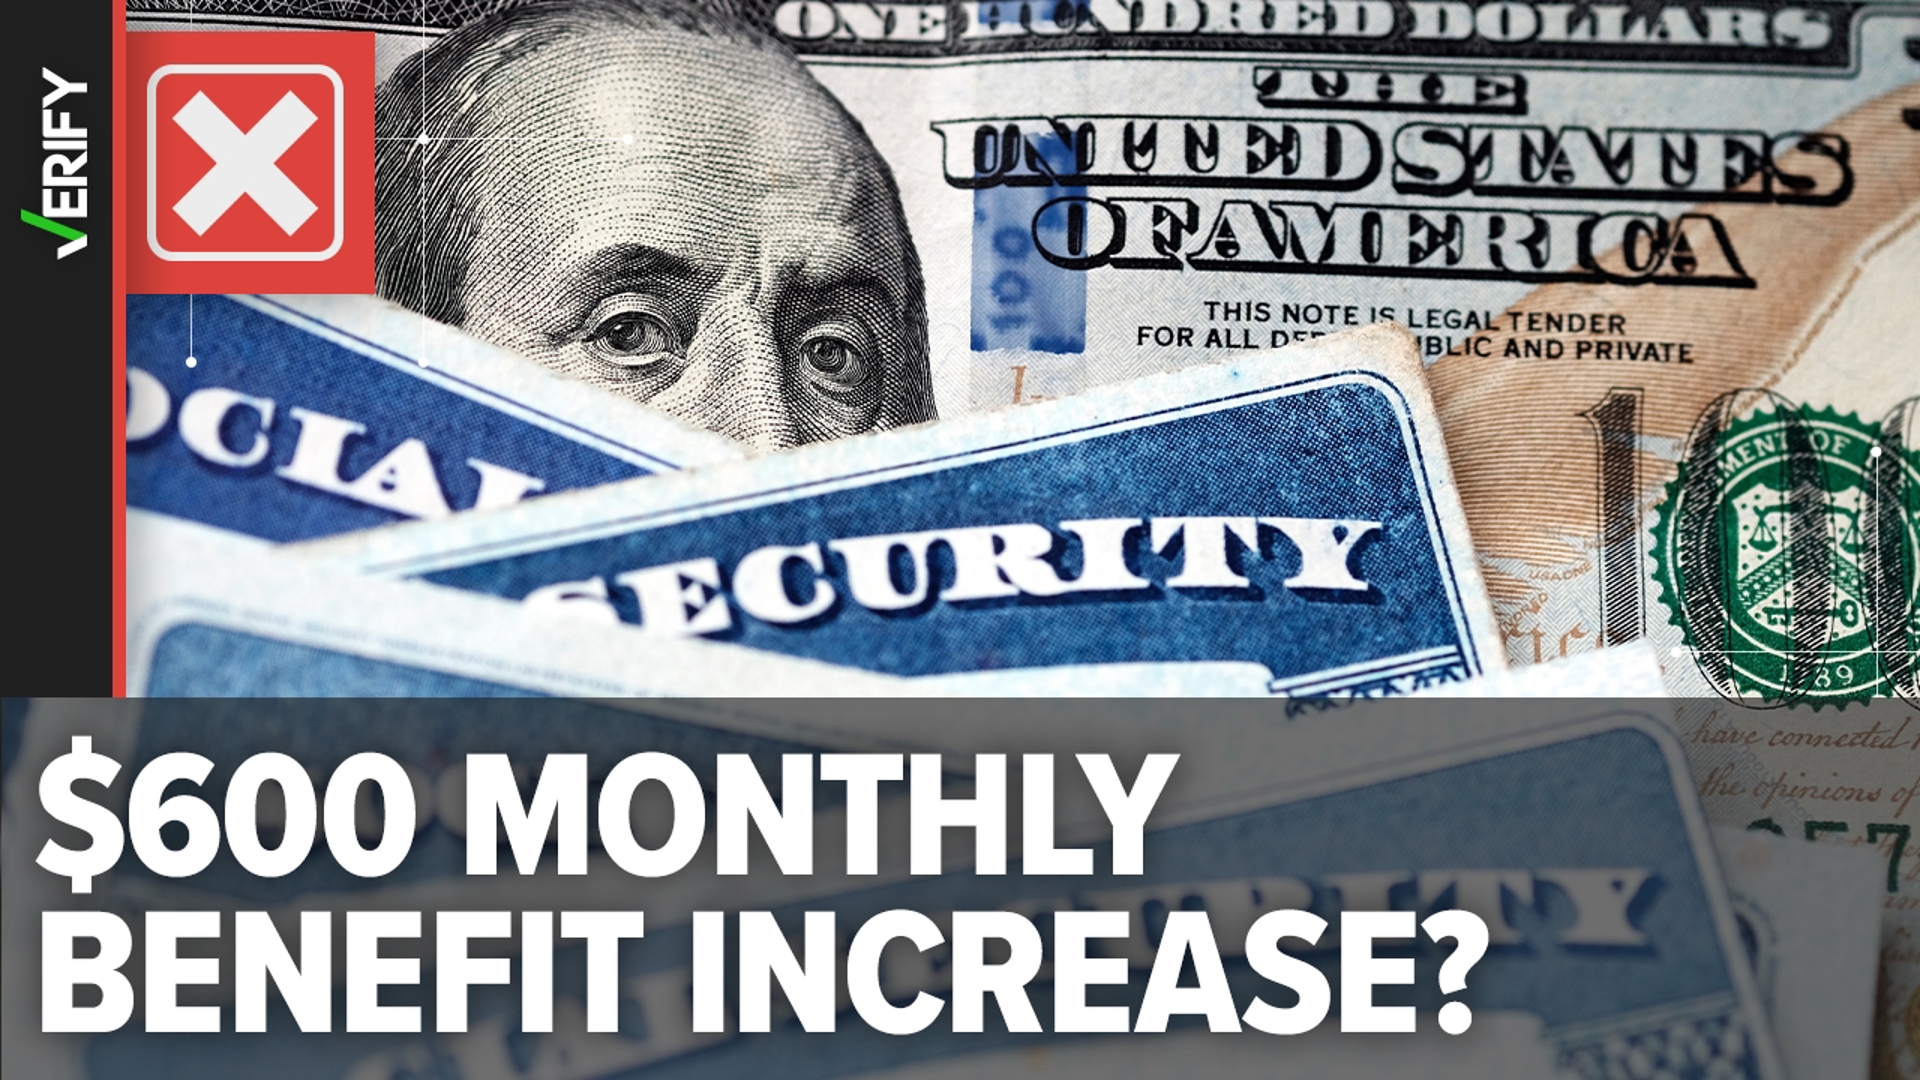 No, Social Security recipients are not getting a 600 monthly payment